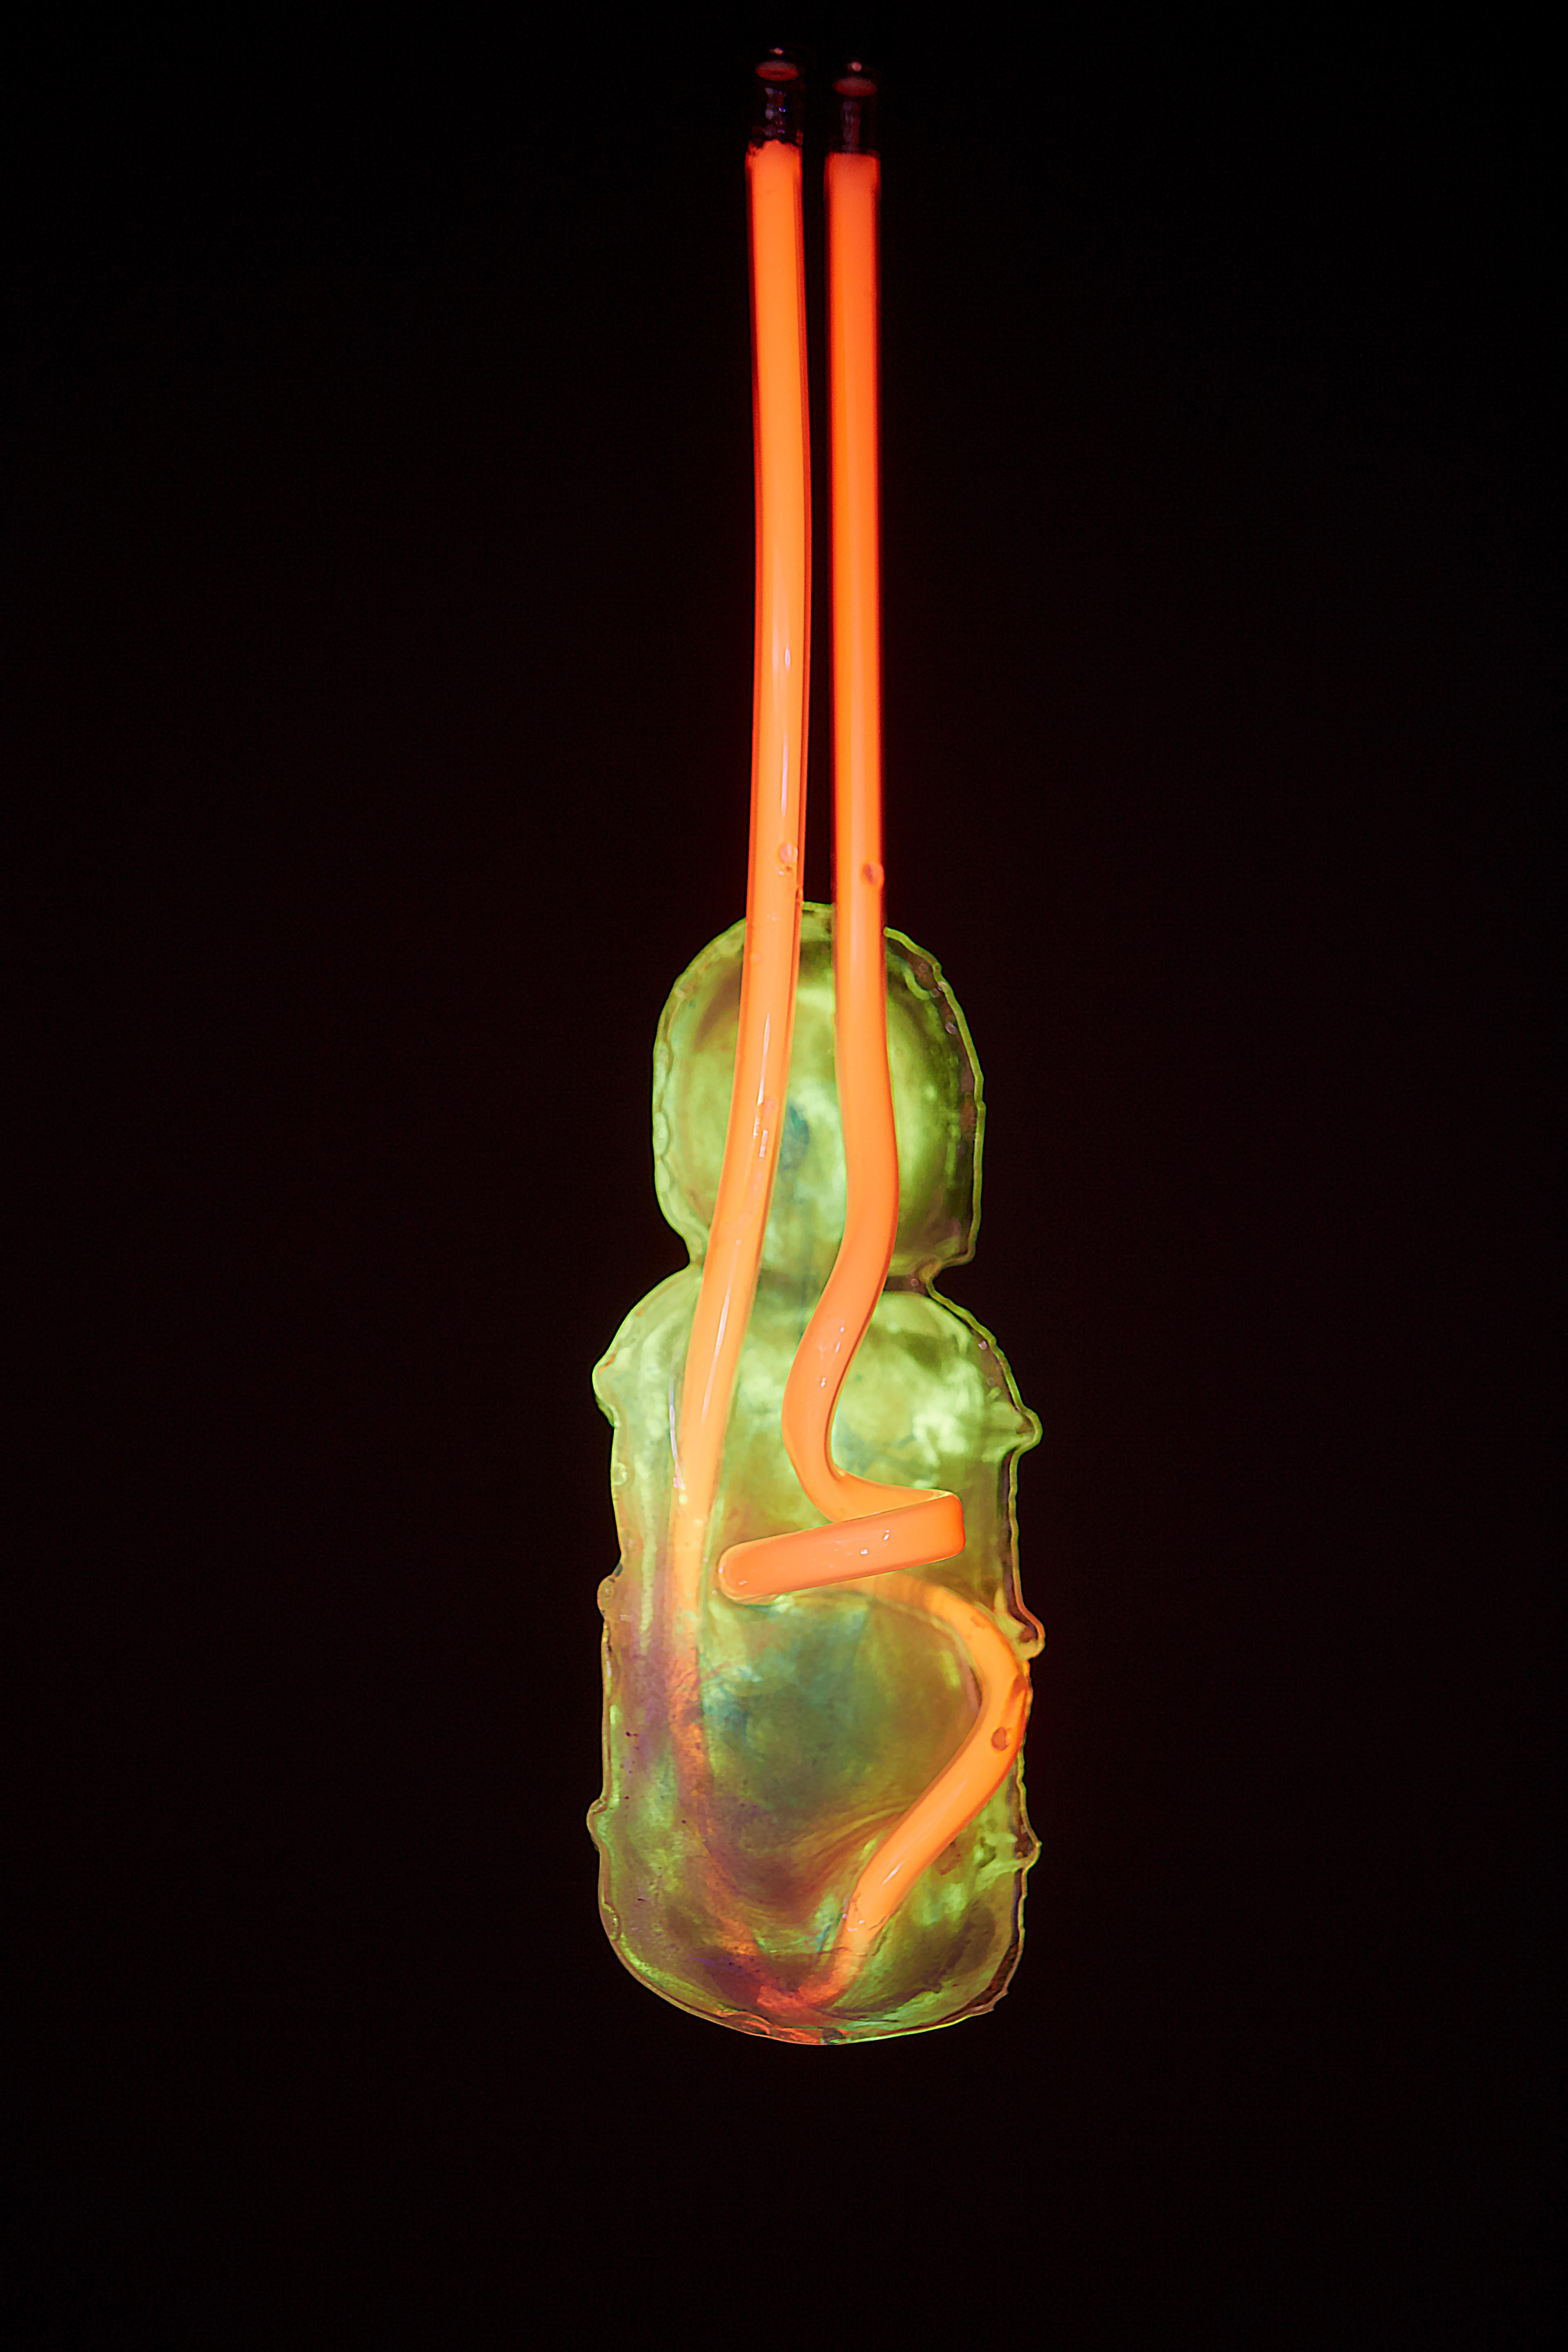 American ‘Ghost’ Hanging Neon Pendant Abstract Light Sculpture, Neon Embedded in Resin For Sale